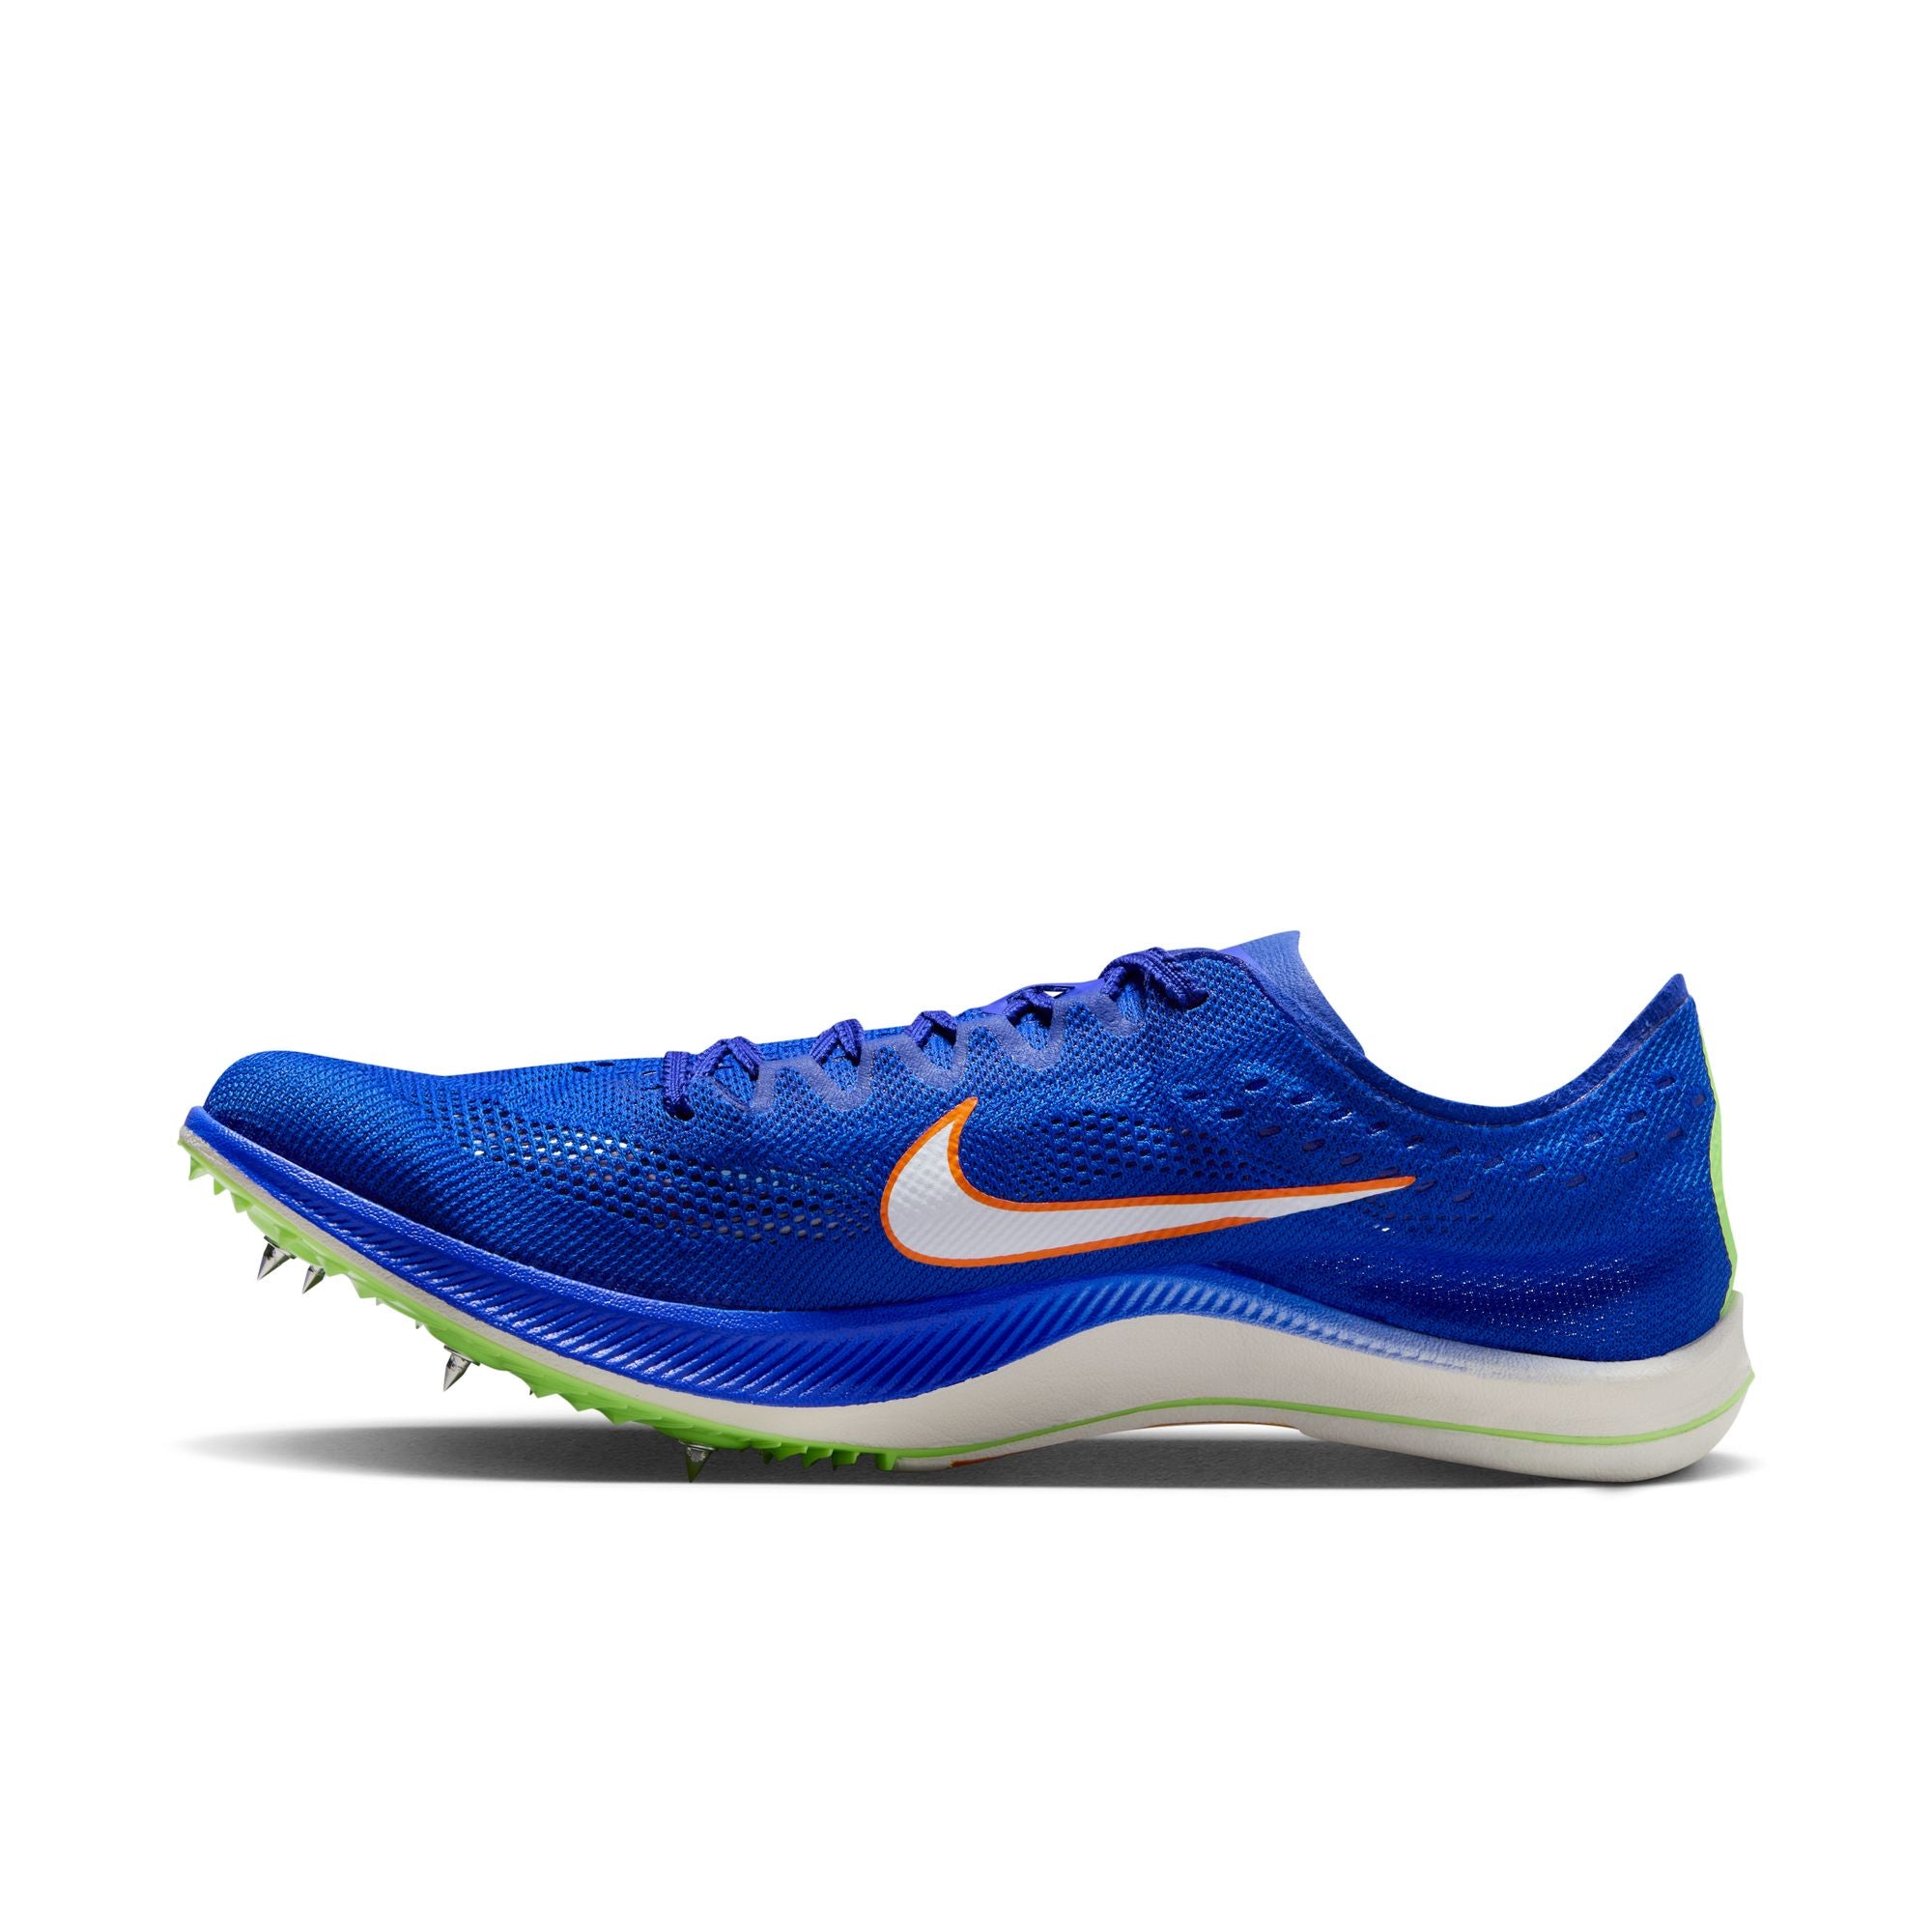 zoomx dragonfly 400 racer blue white safety orange 